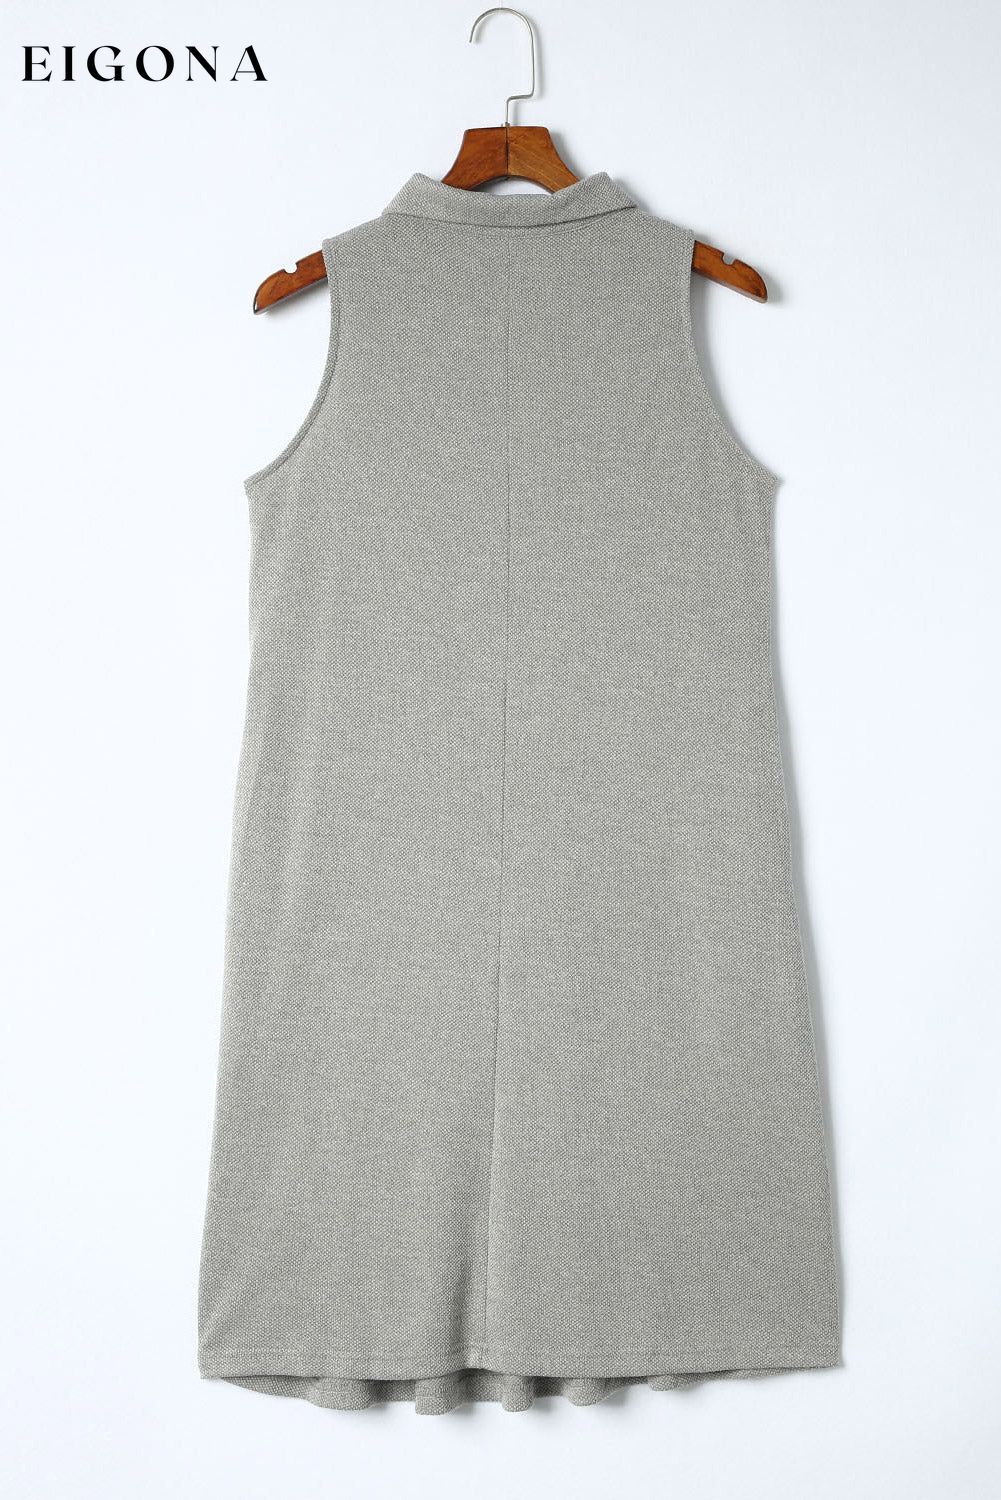 Gray Button Collared Sleeveless Polo Dress casual dress casual dresses clothes dress dresses Occasion Daily Print Solid Color Season Summer short dresses Silhouette H-Line Style Casual